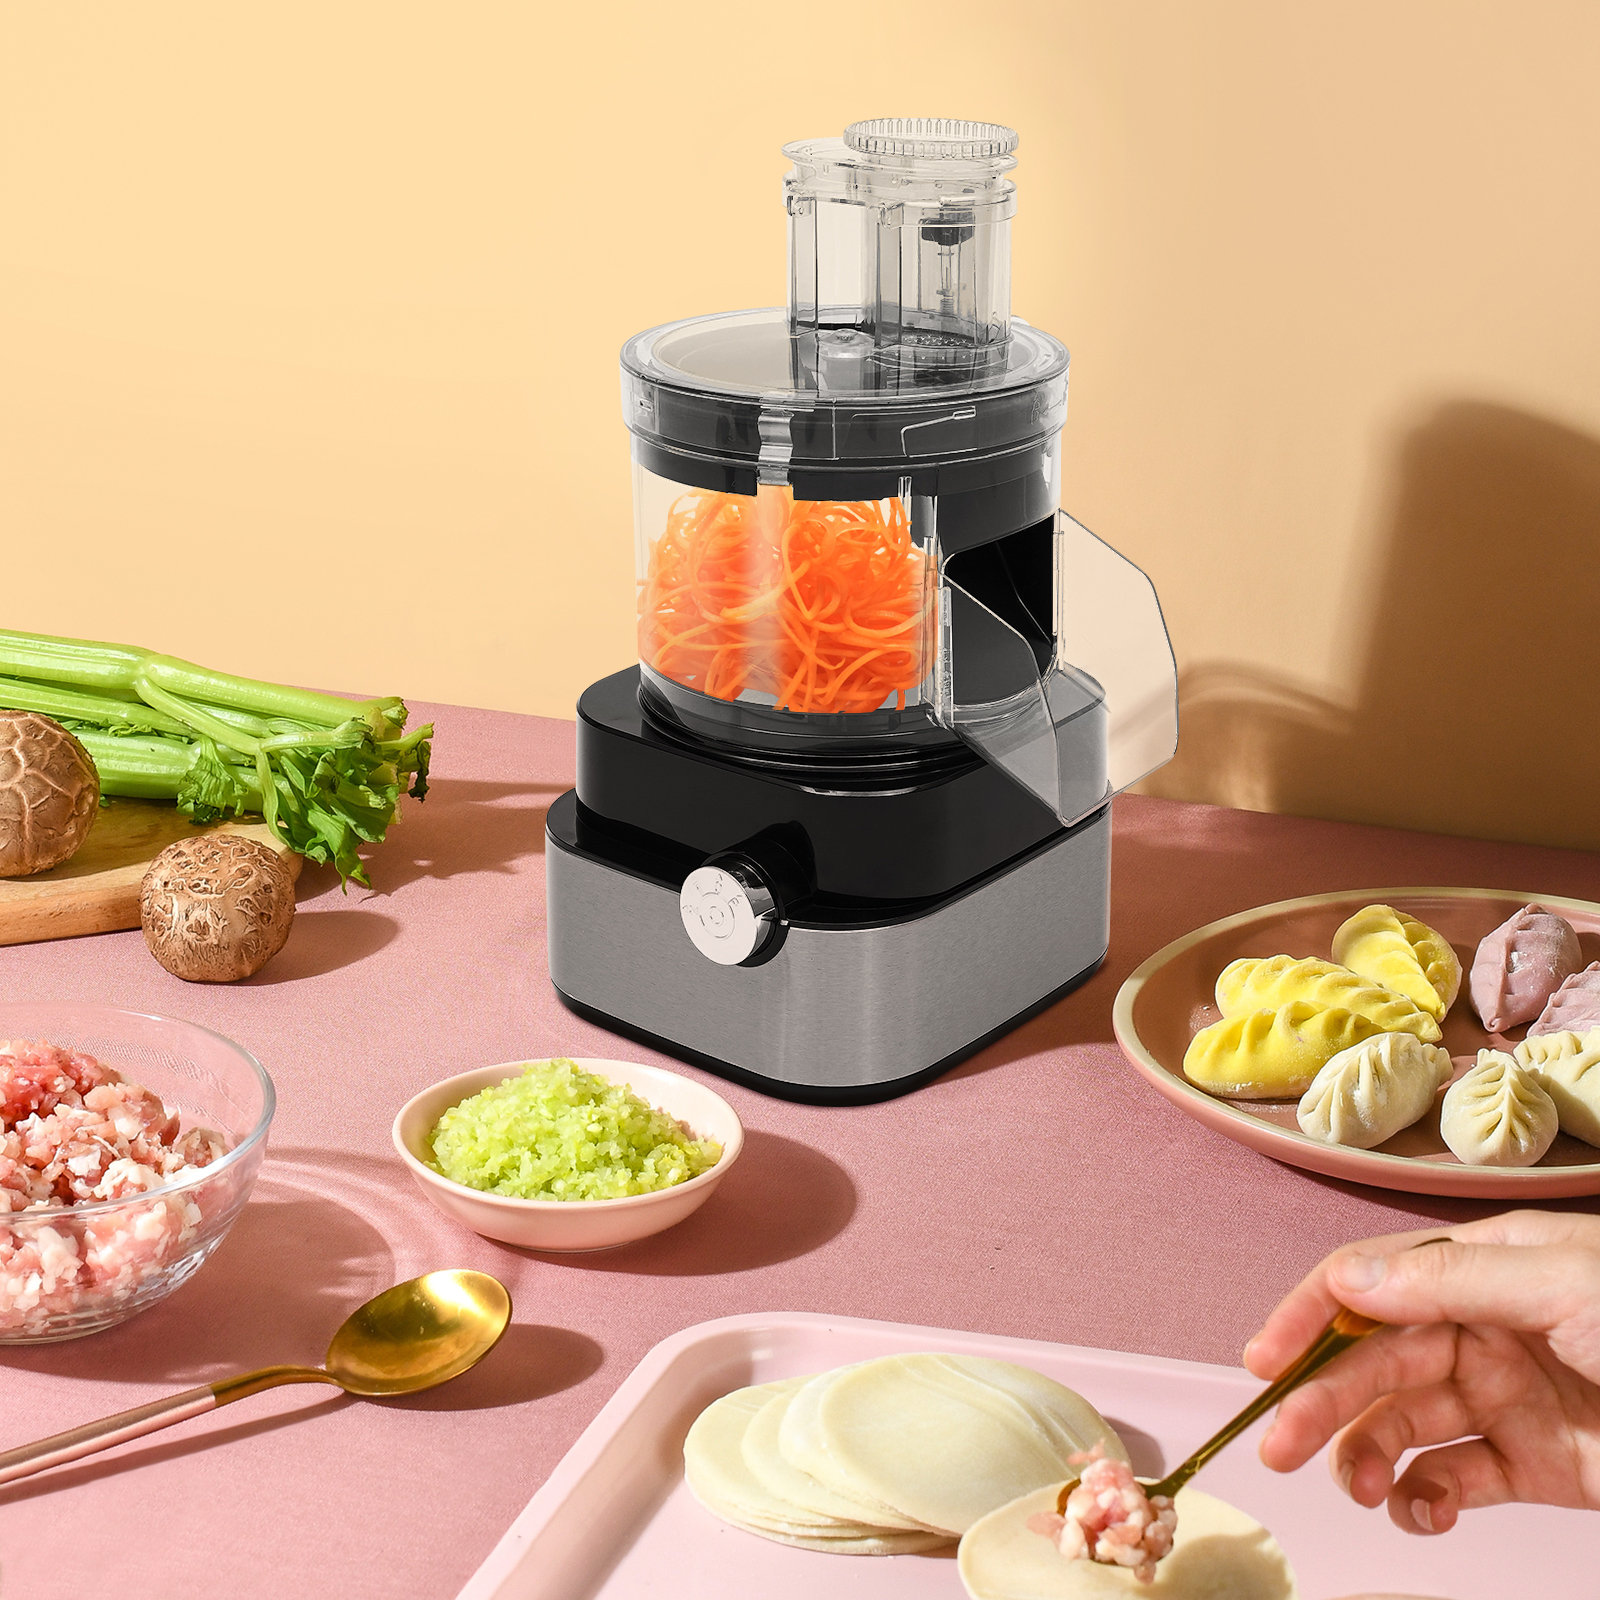 Grinding Carrots Using An Electric Food Processor Stock Photo